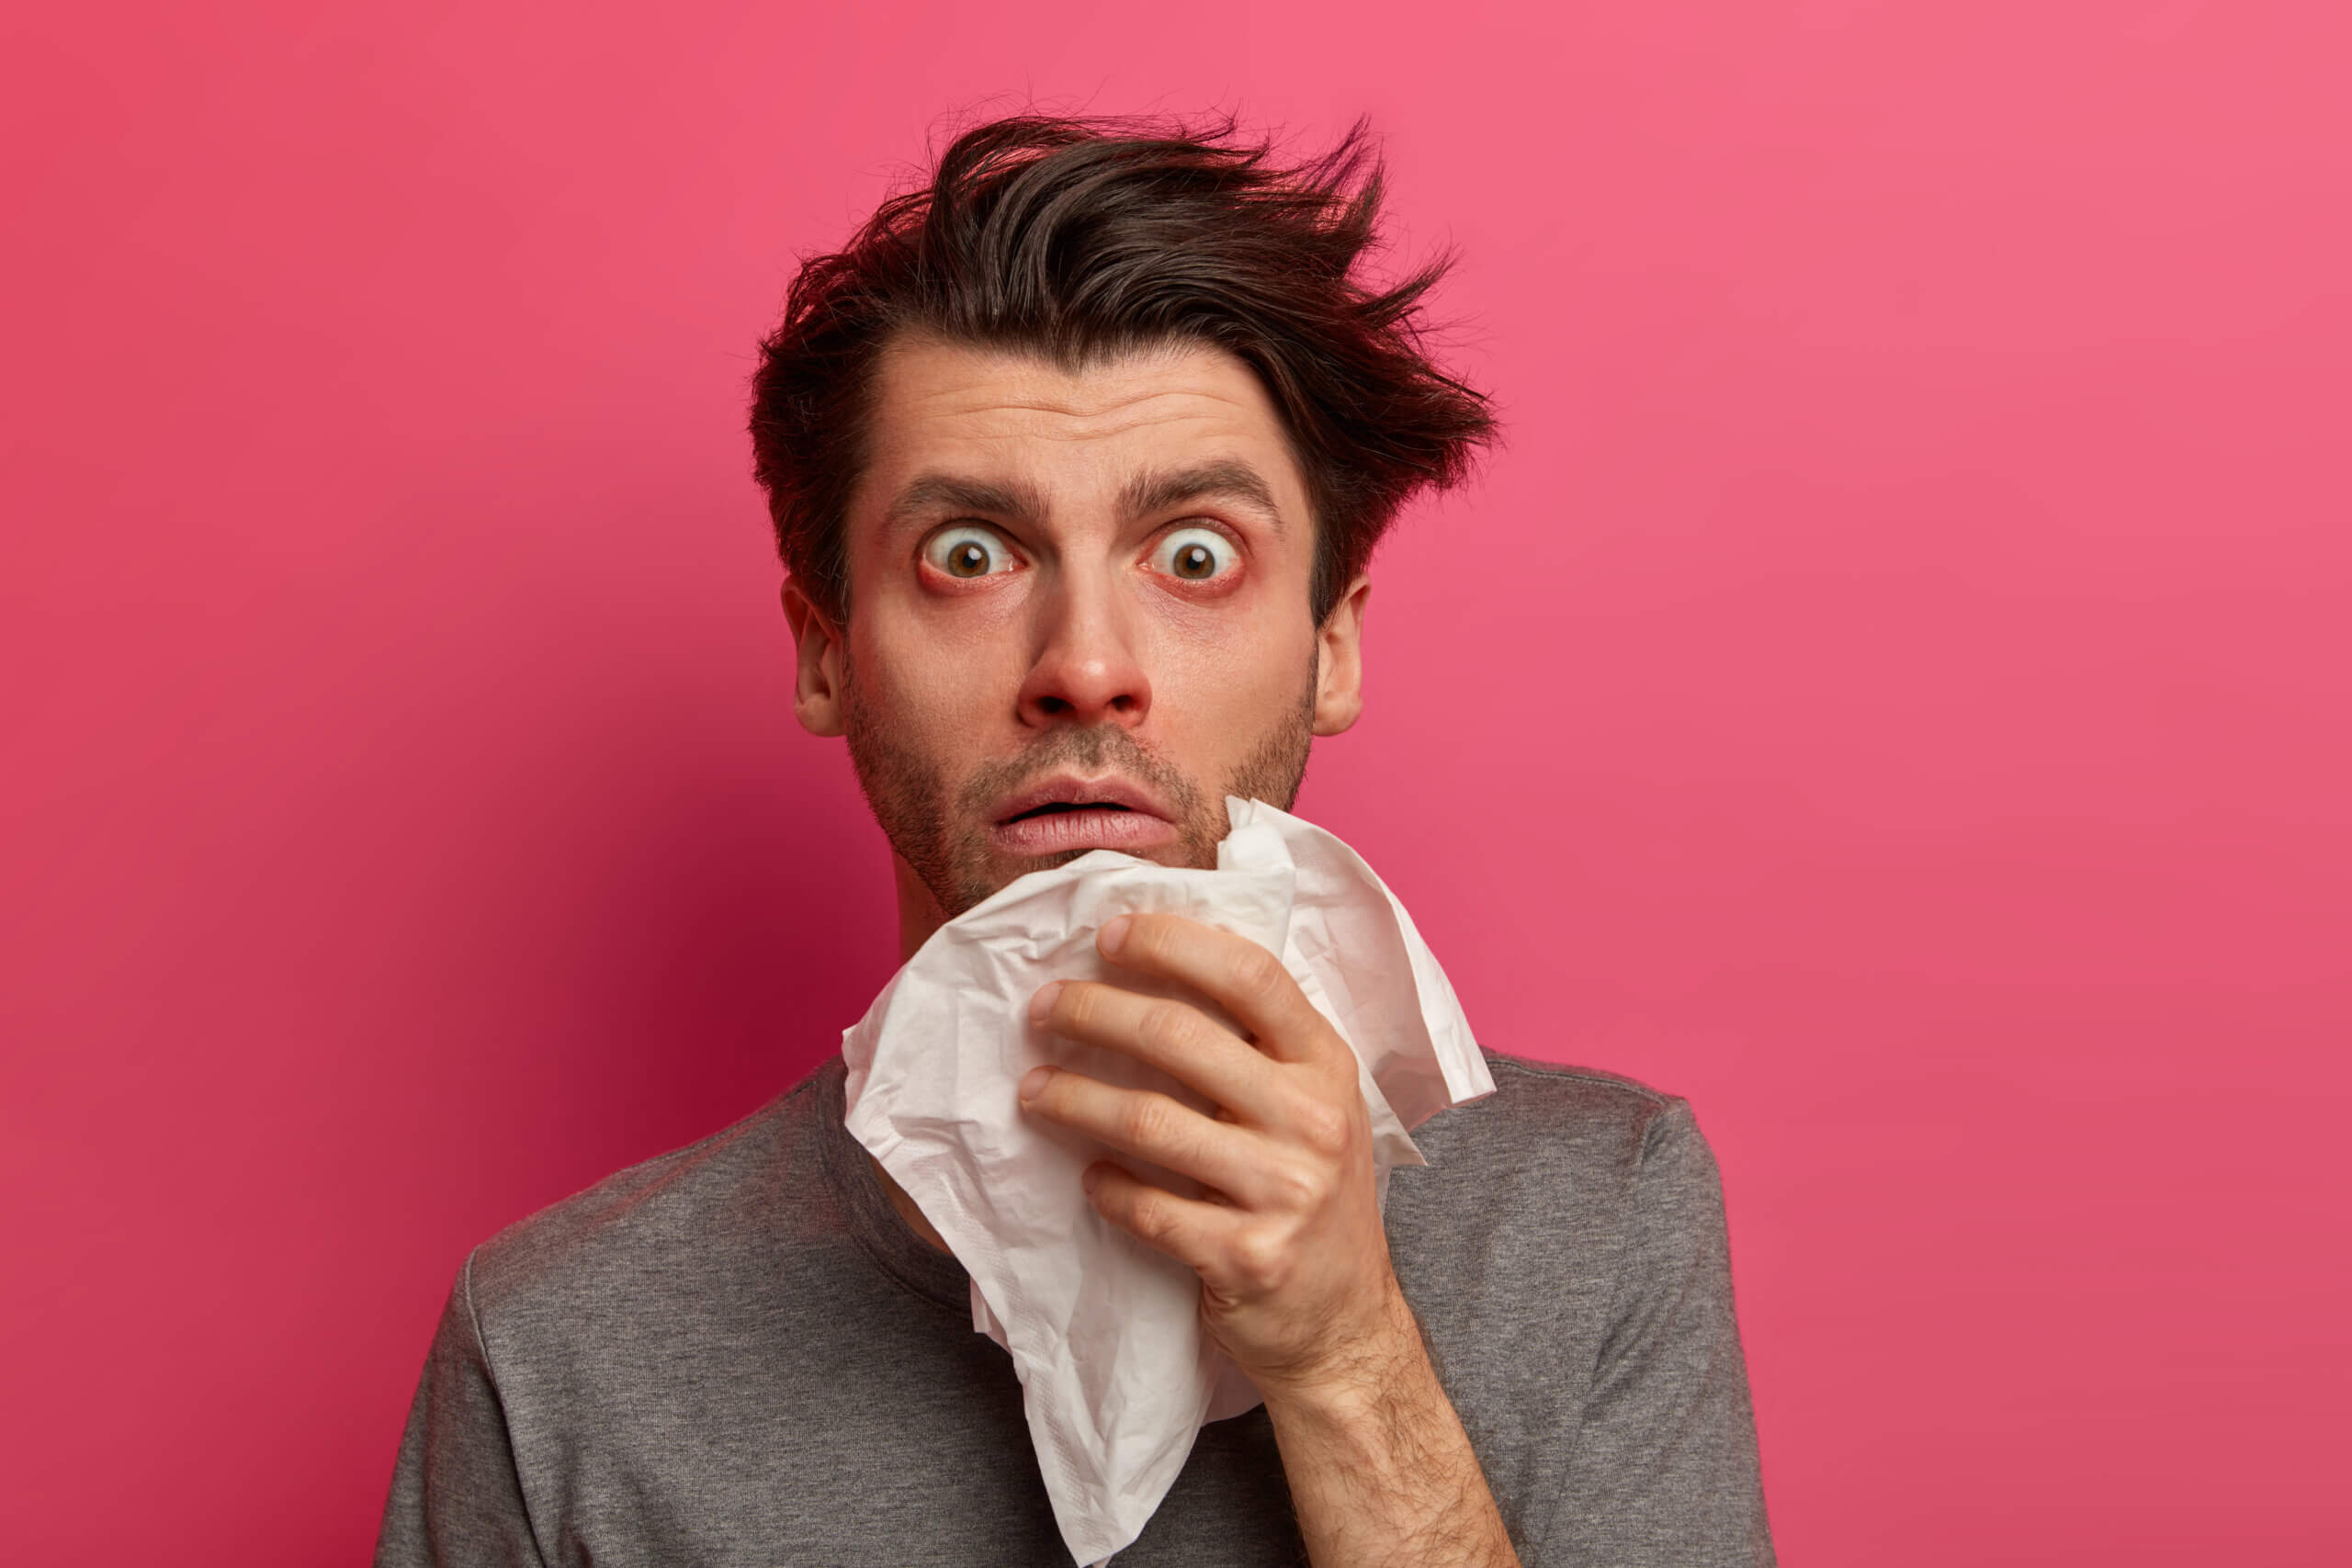 Stunned sick man has flu, virus or allergy respiratory, red watery eyes, blows nose in tissue, finds out about serious disease, poses over pink background. Health, medicine and symptoms concept